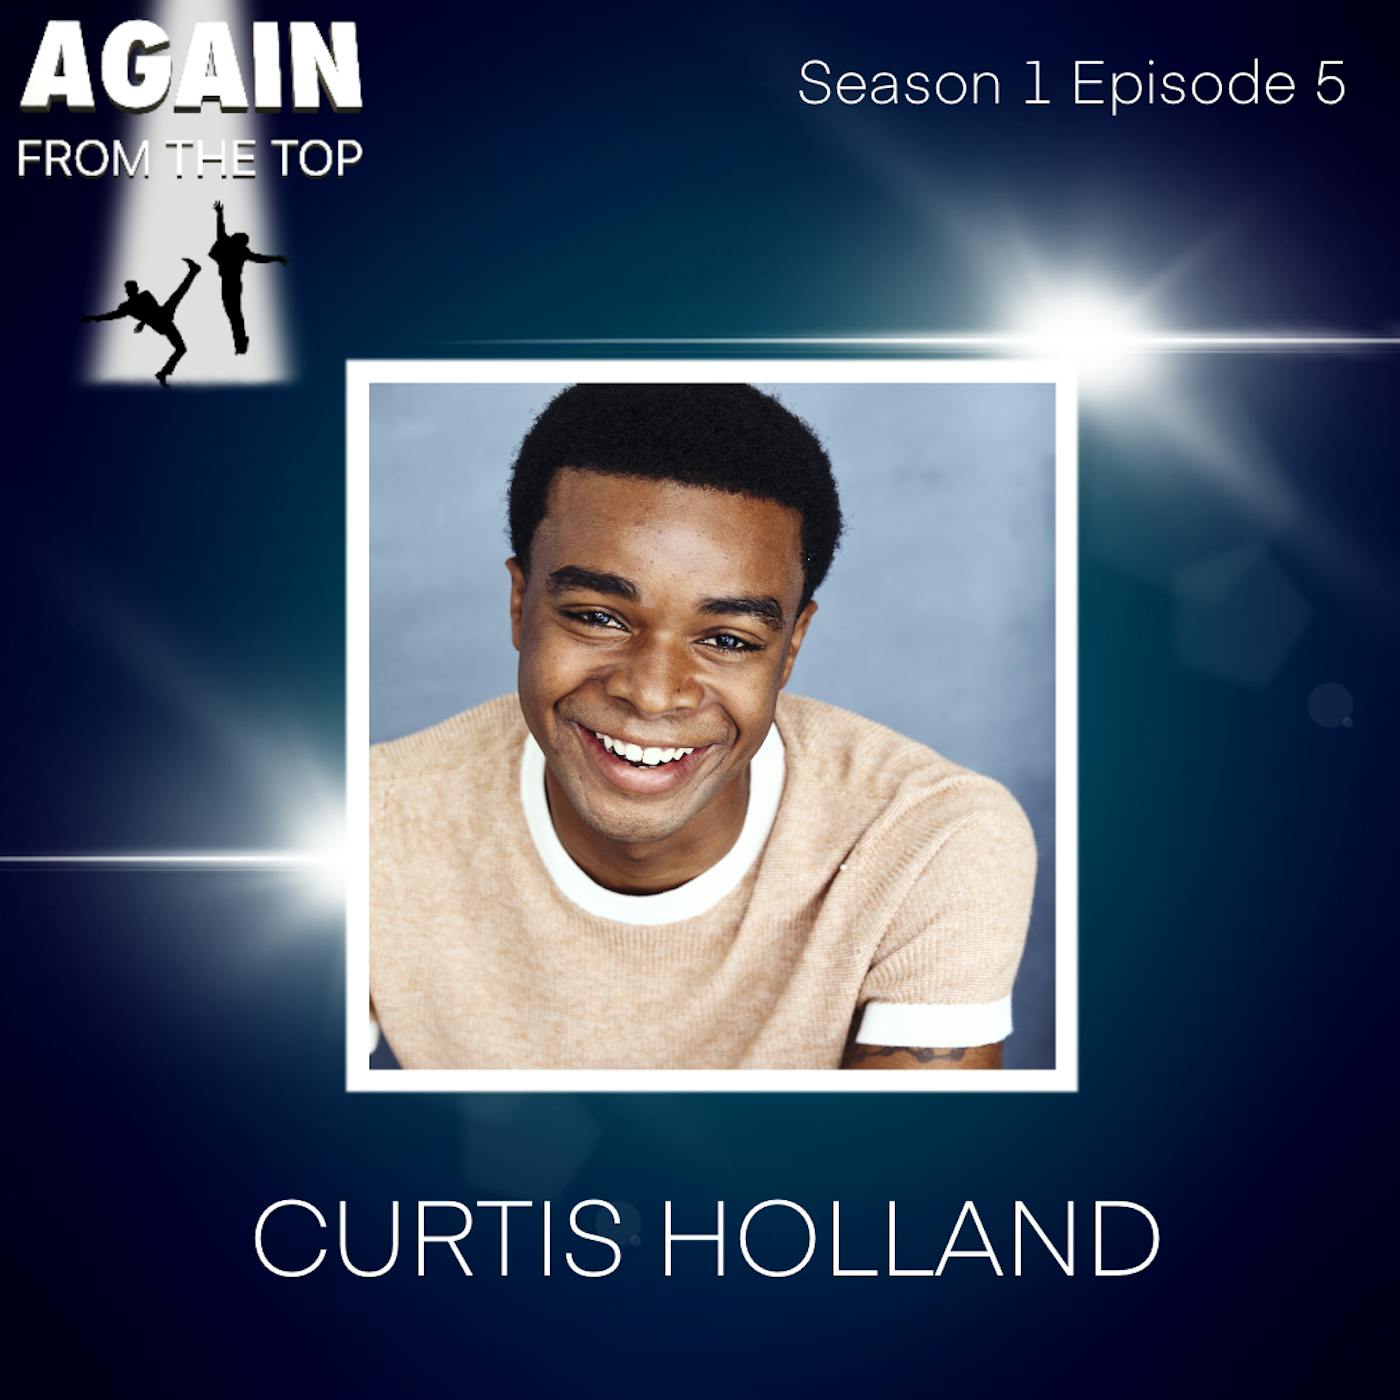 S1/Ep5: CURTIS HOLLAND AND THE ART OF SUBTLETY